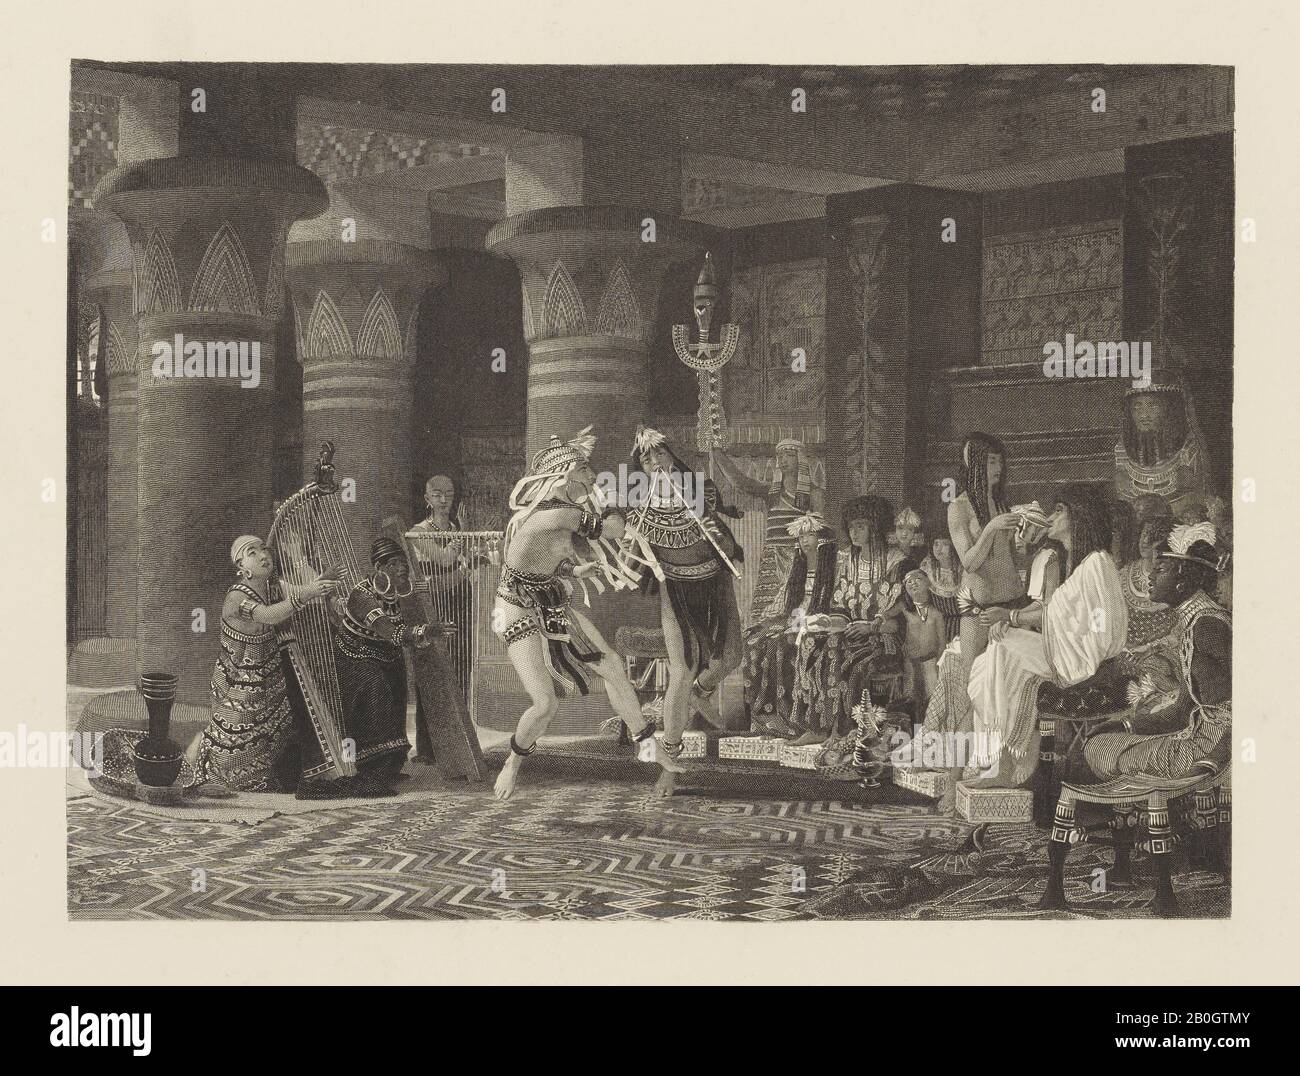 Unknown, Egyptian Court Scene, 19th century, Steel engraving on paper, image: 6 13/16 x 9 1/4 in. (17.3 x 23.5 cm Stock Photo